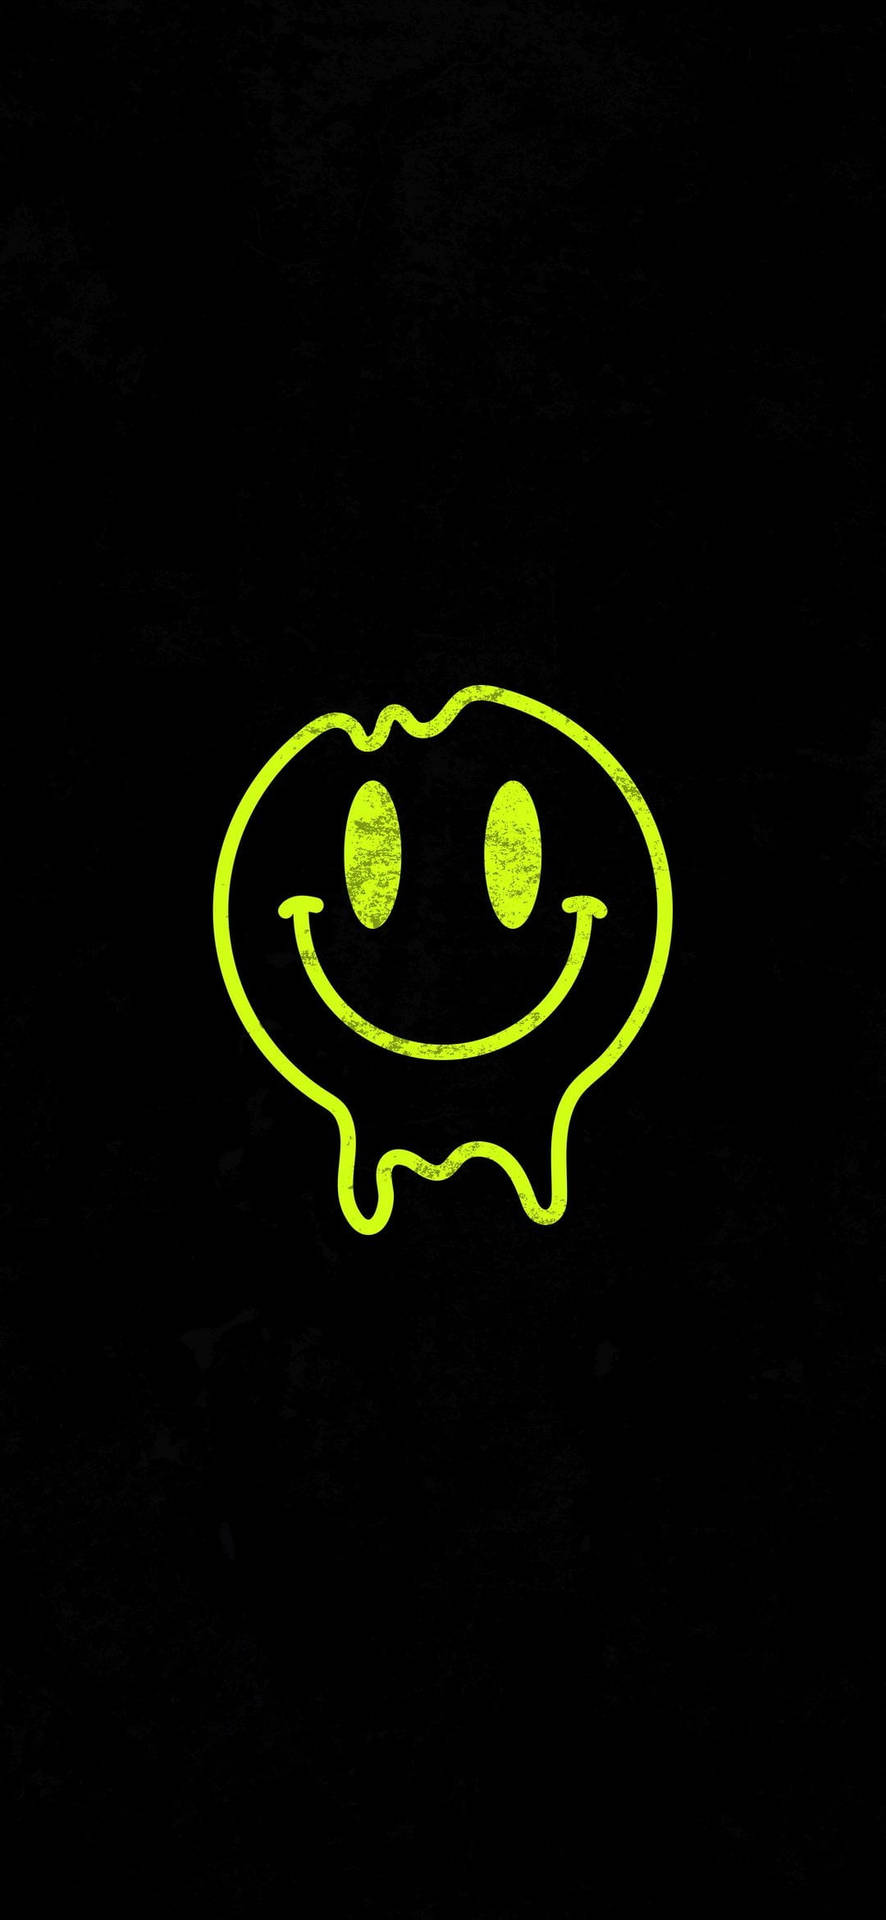 Black And Green Smiley Face Background